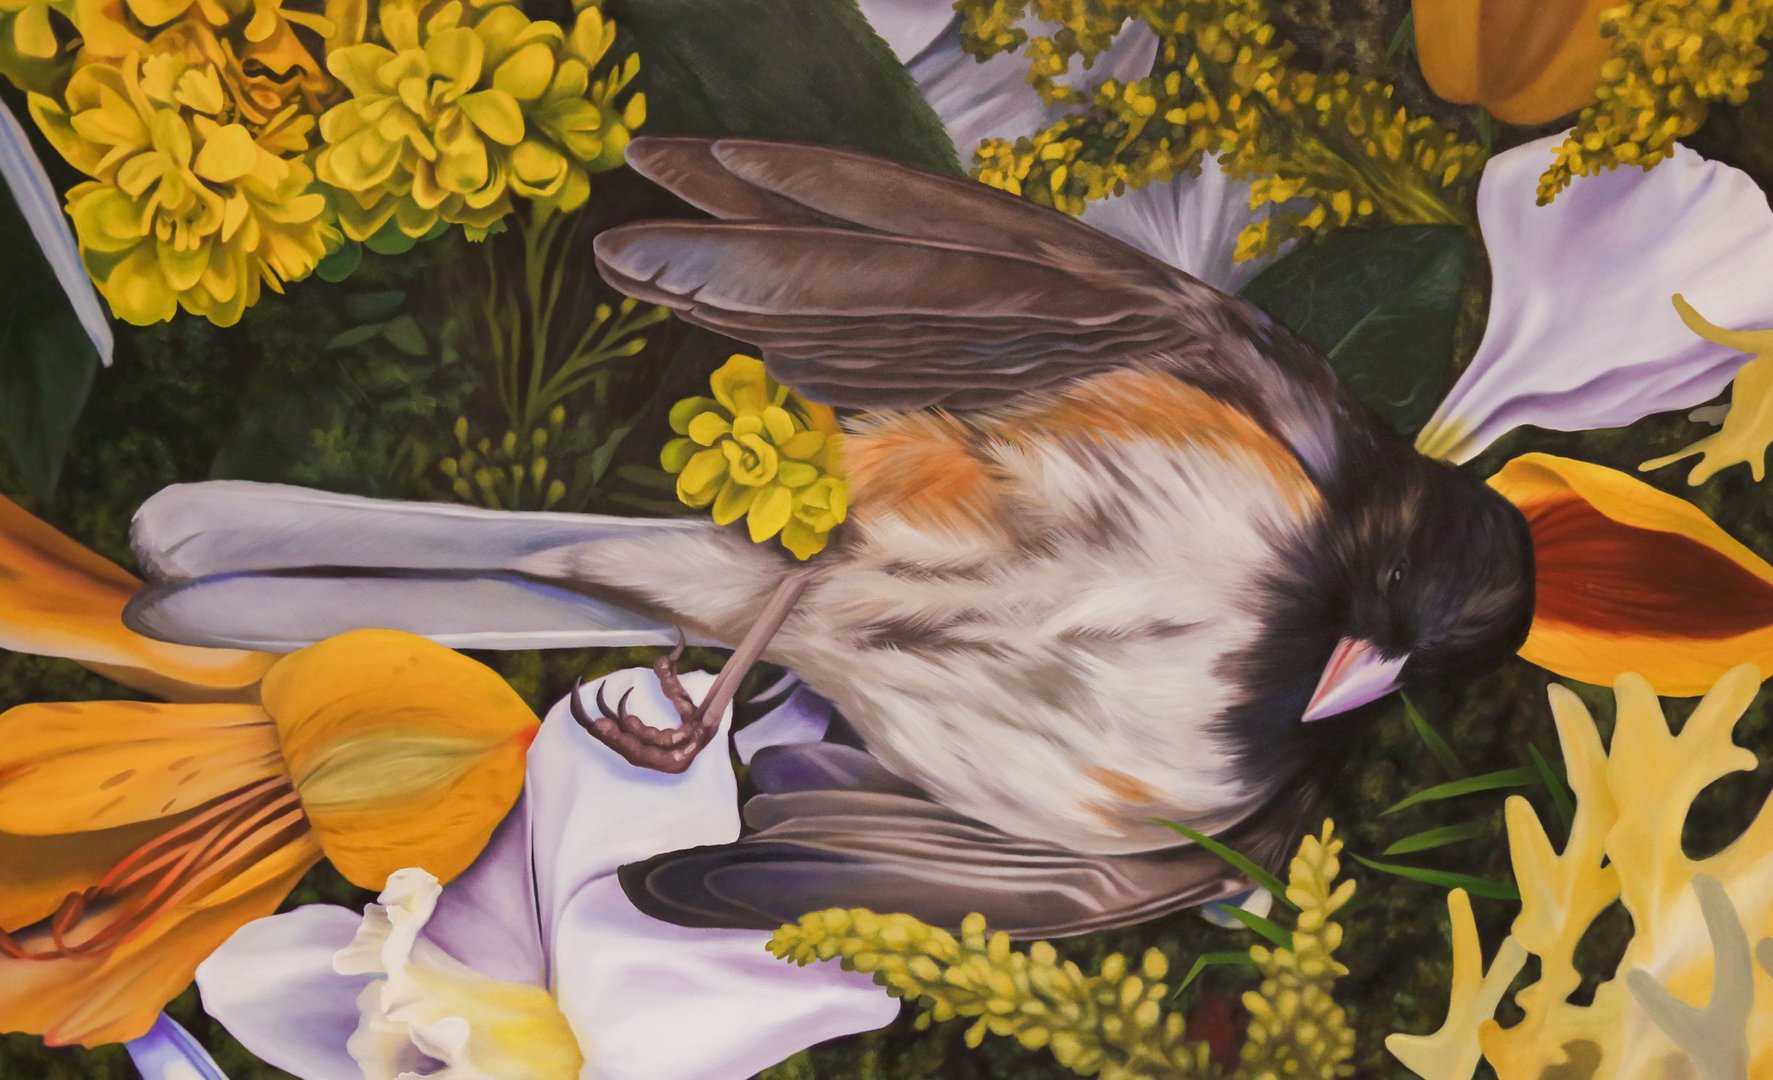 Oil painting of a dead bird in a patch of flowers.jpg